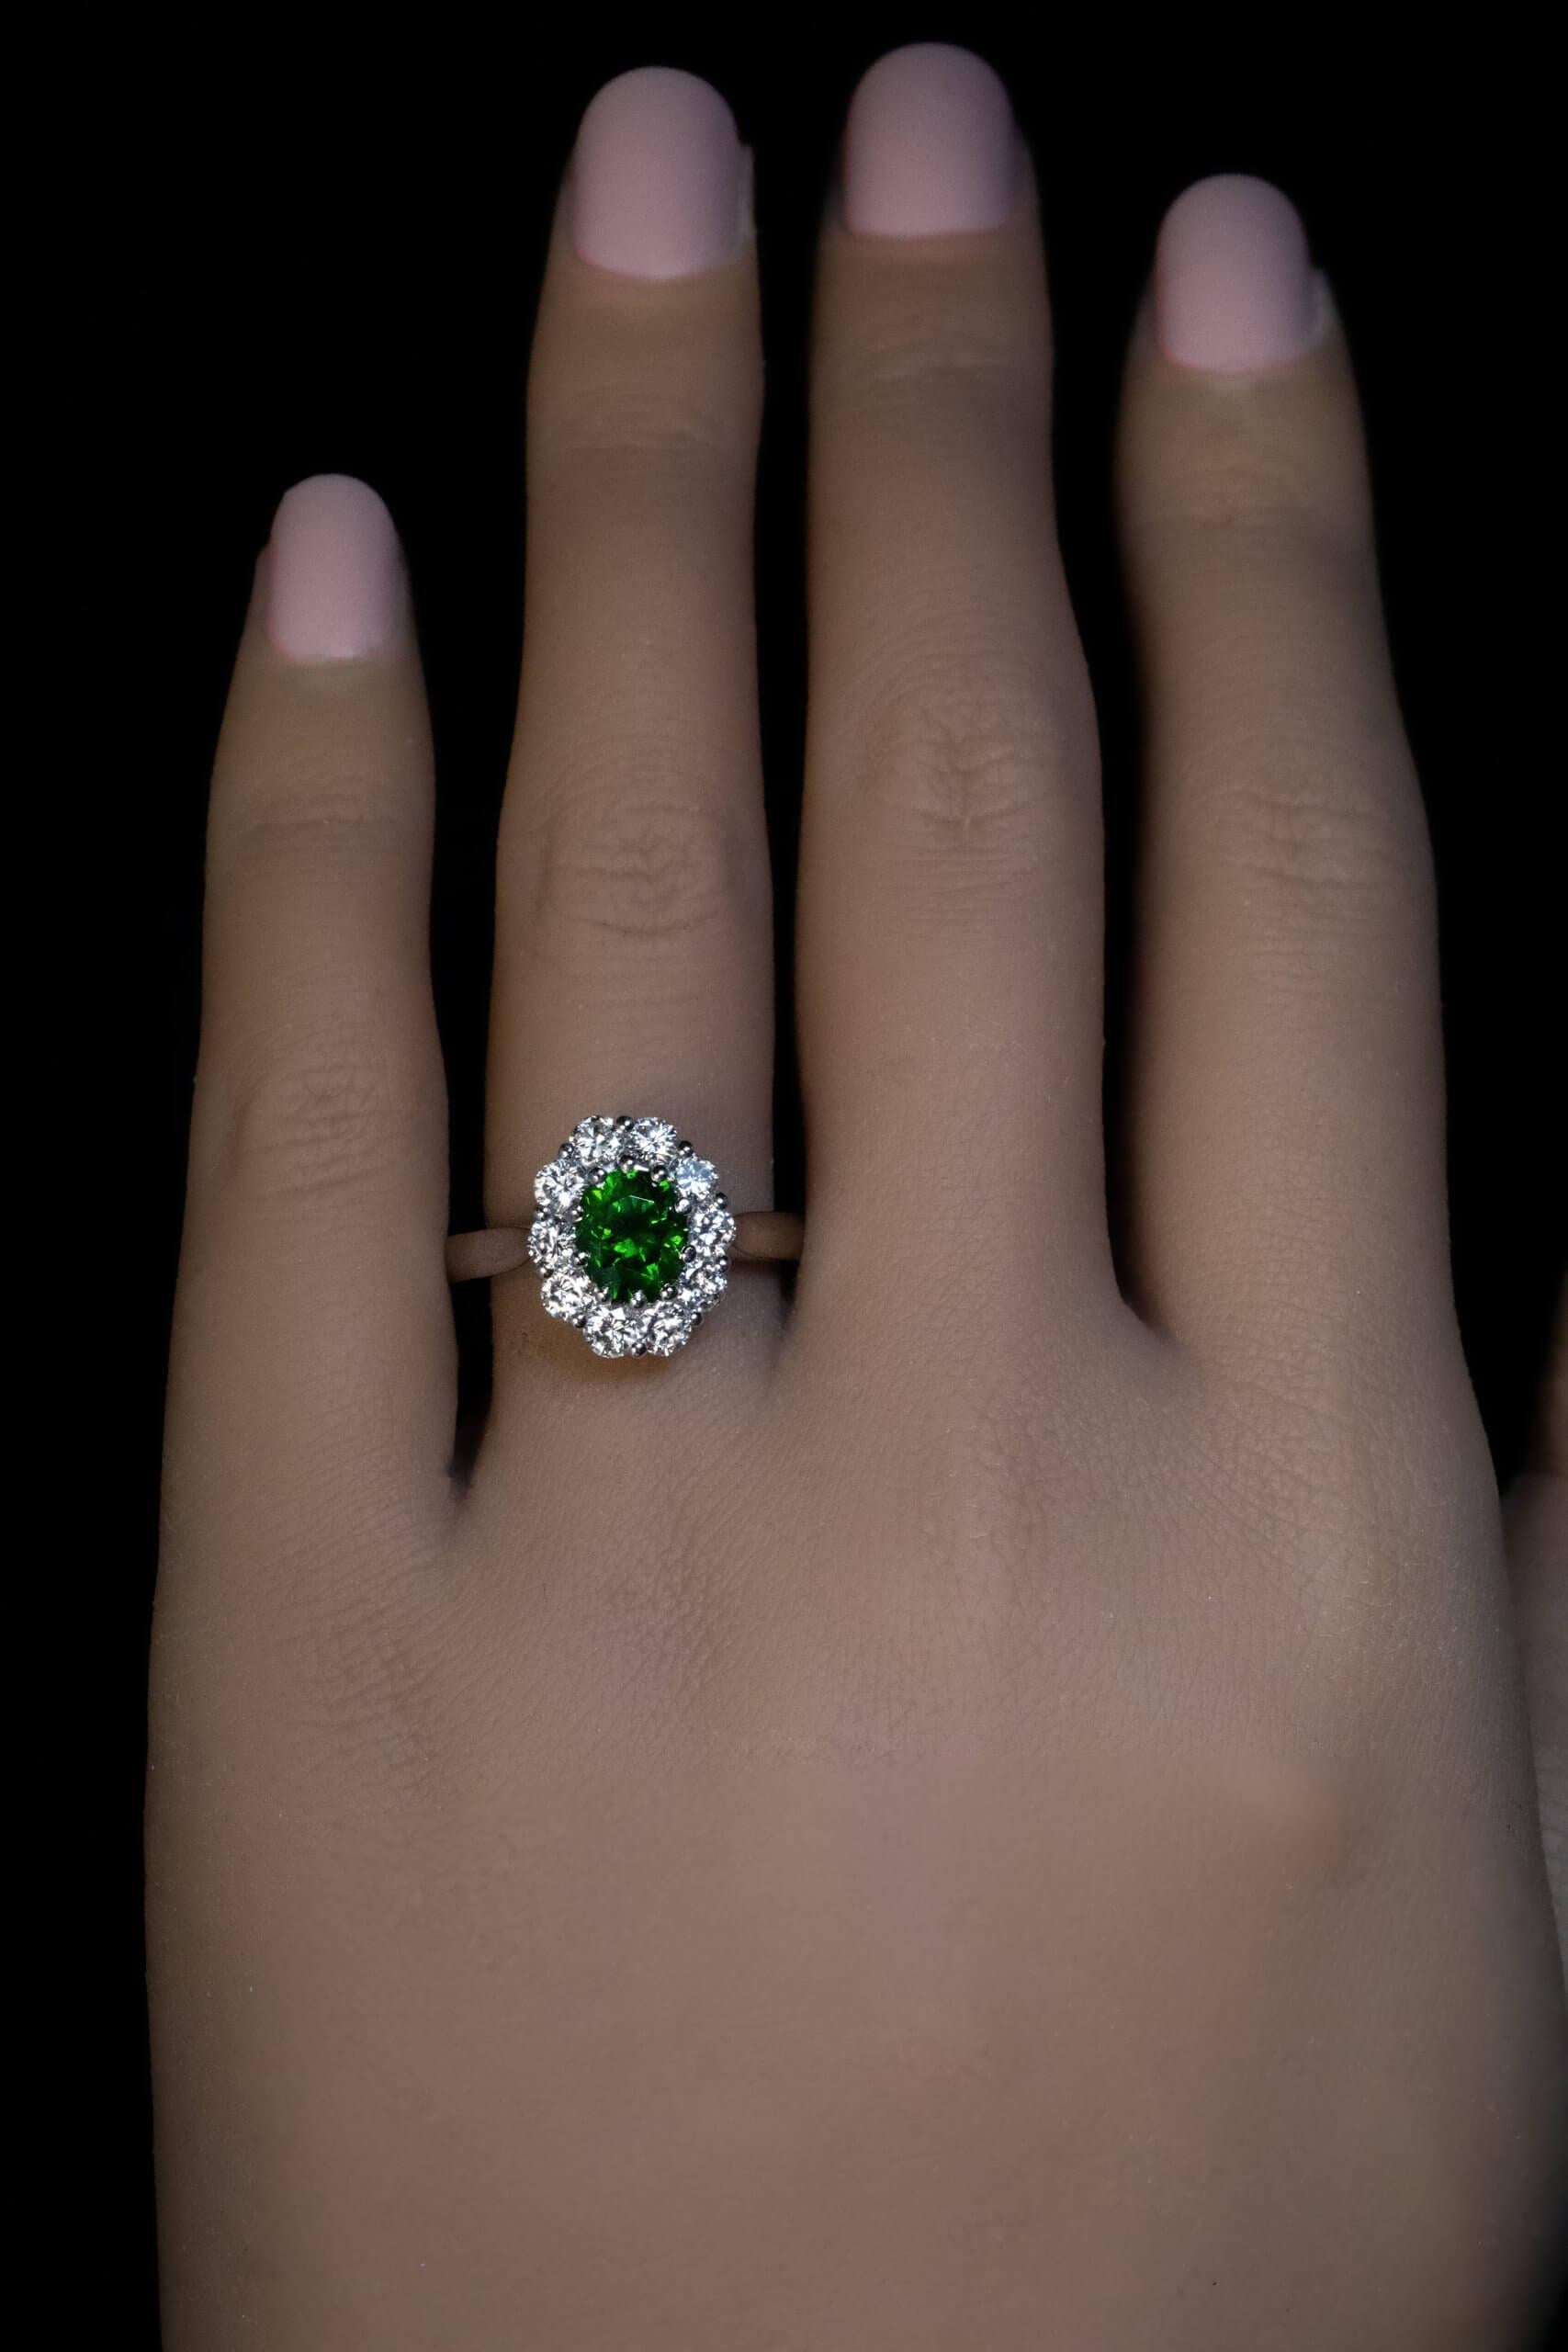 This contemporary custom-made platinum ring features a 1.55 ct oval Russian demantoid of an excellent dark green color. The demantoid is surrounded by bright white diamonds (F-G color, VS clarity).  The demantoid has some fine horsetail inclusions